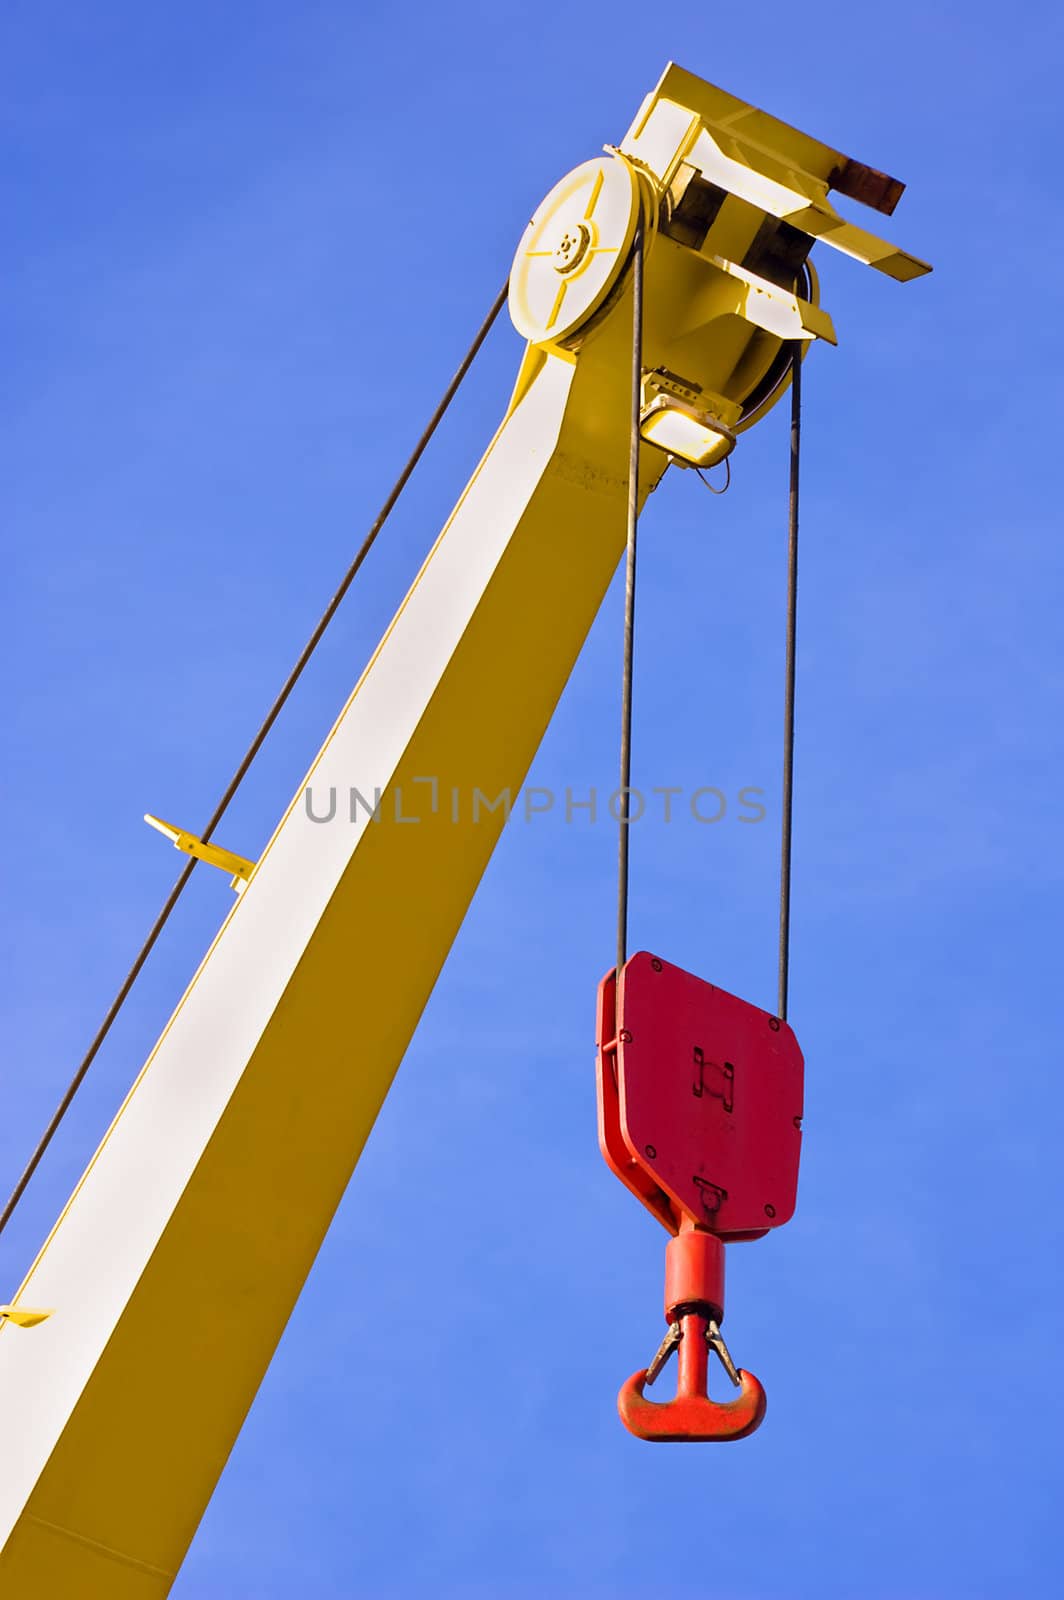 Yellow crane with red hook against blue sky